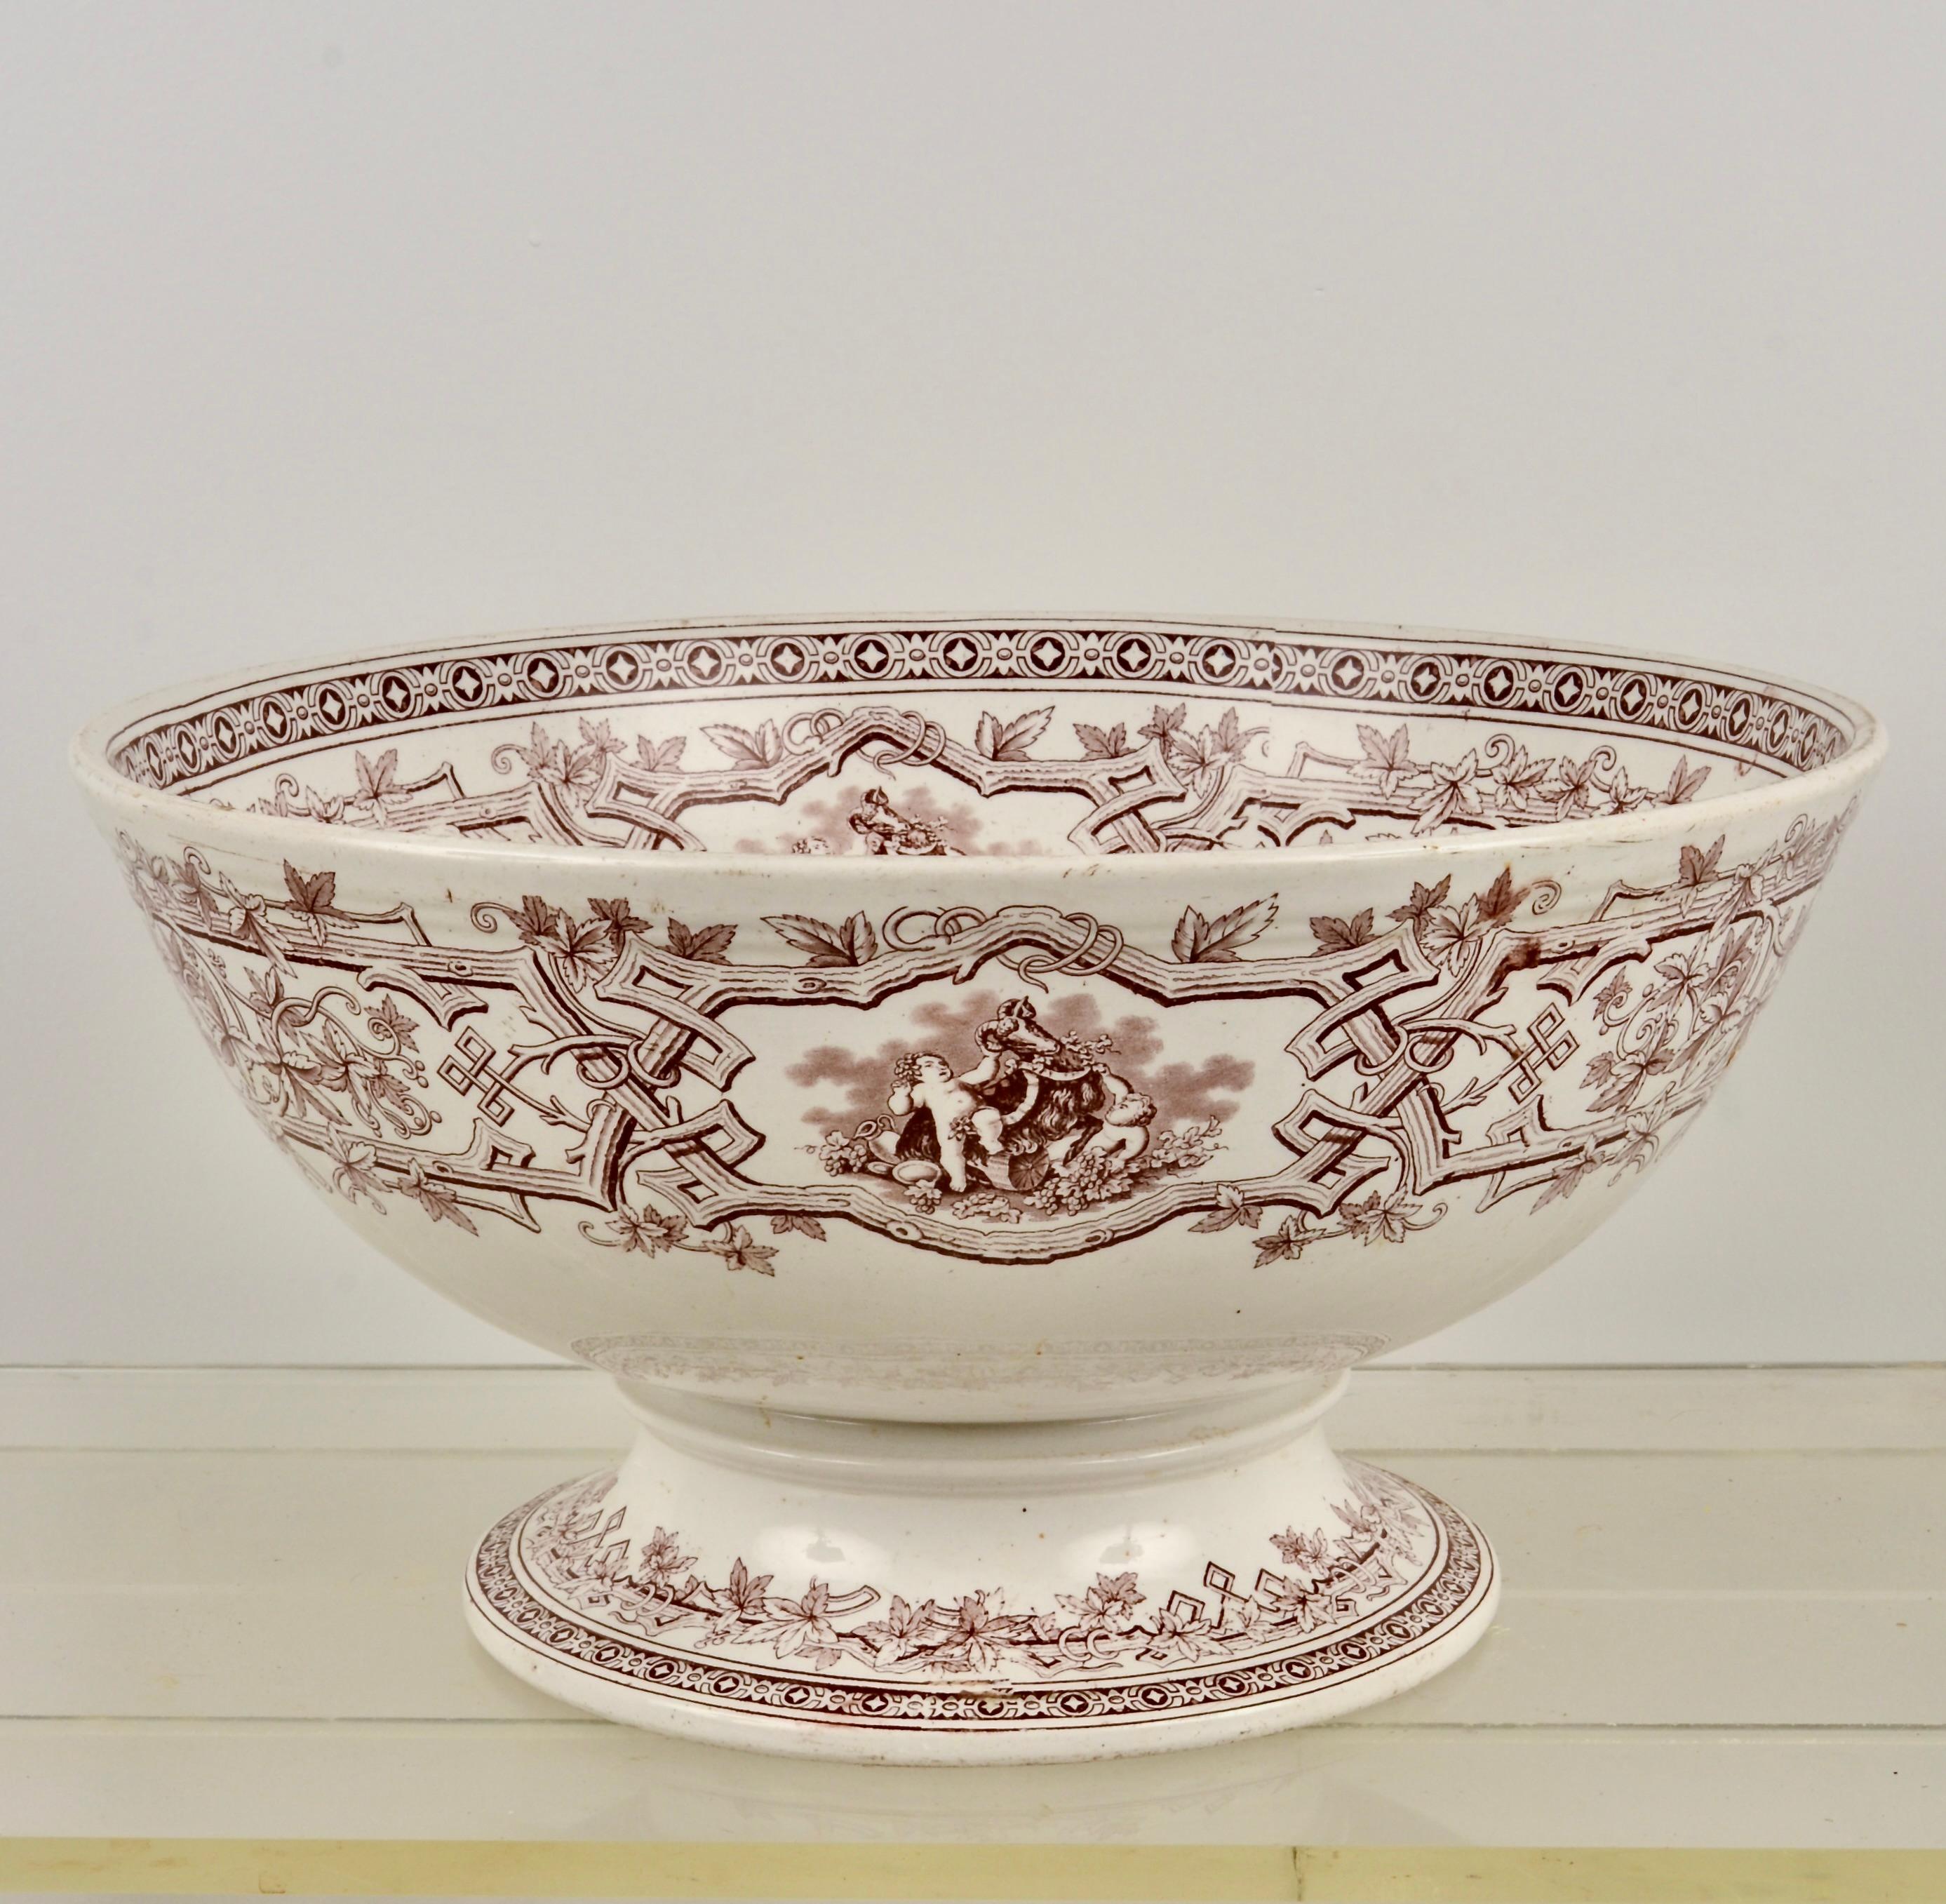 Wonderful large scale on this English bowl.  Transferware design featuring the natural motifs, popular in the arts and crafts movement surround more traditional romantic genre scenes. Very fine vintage condition. No damage. 